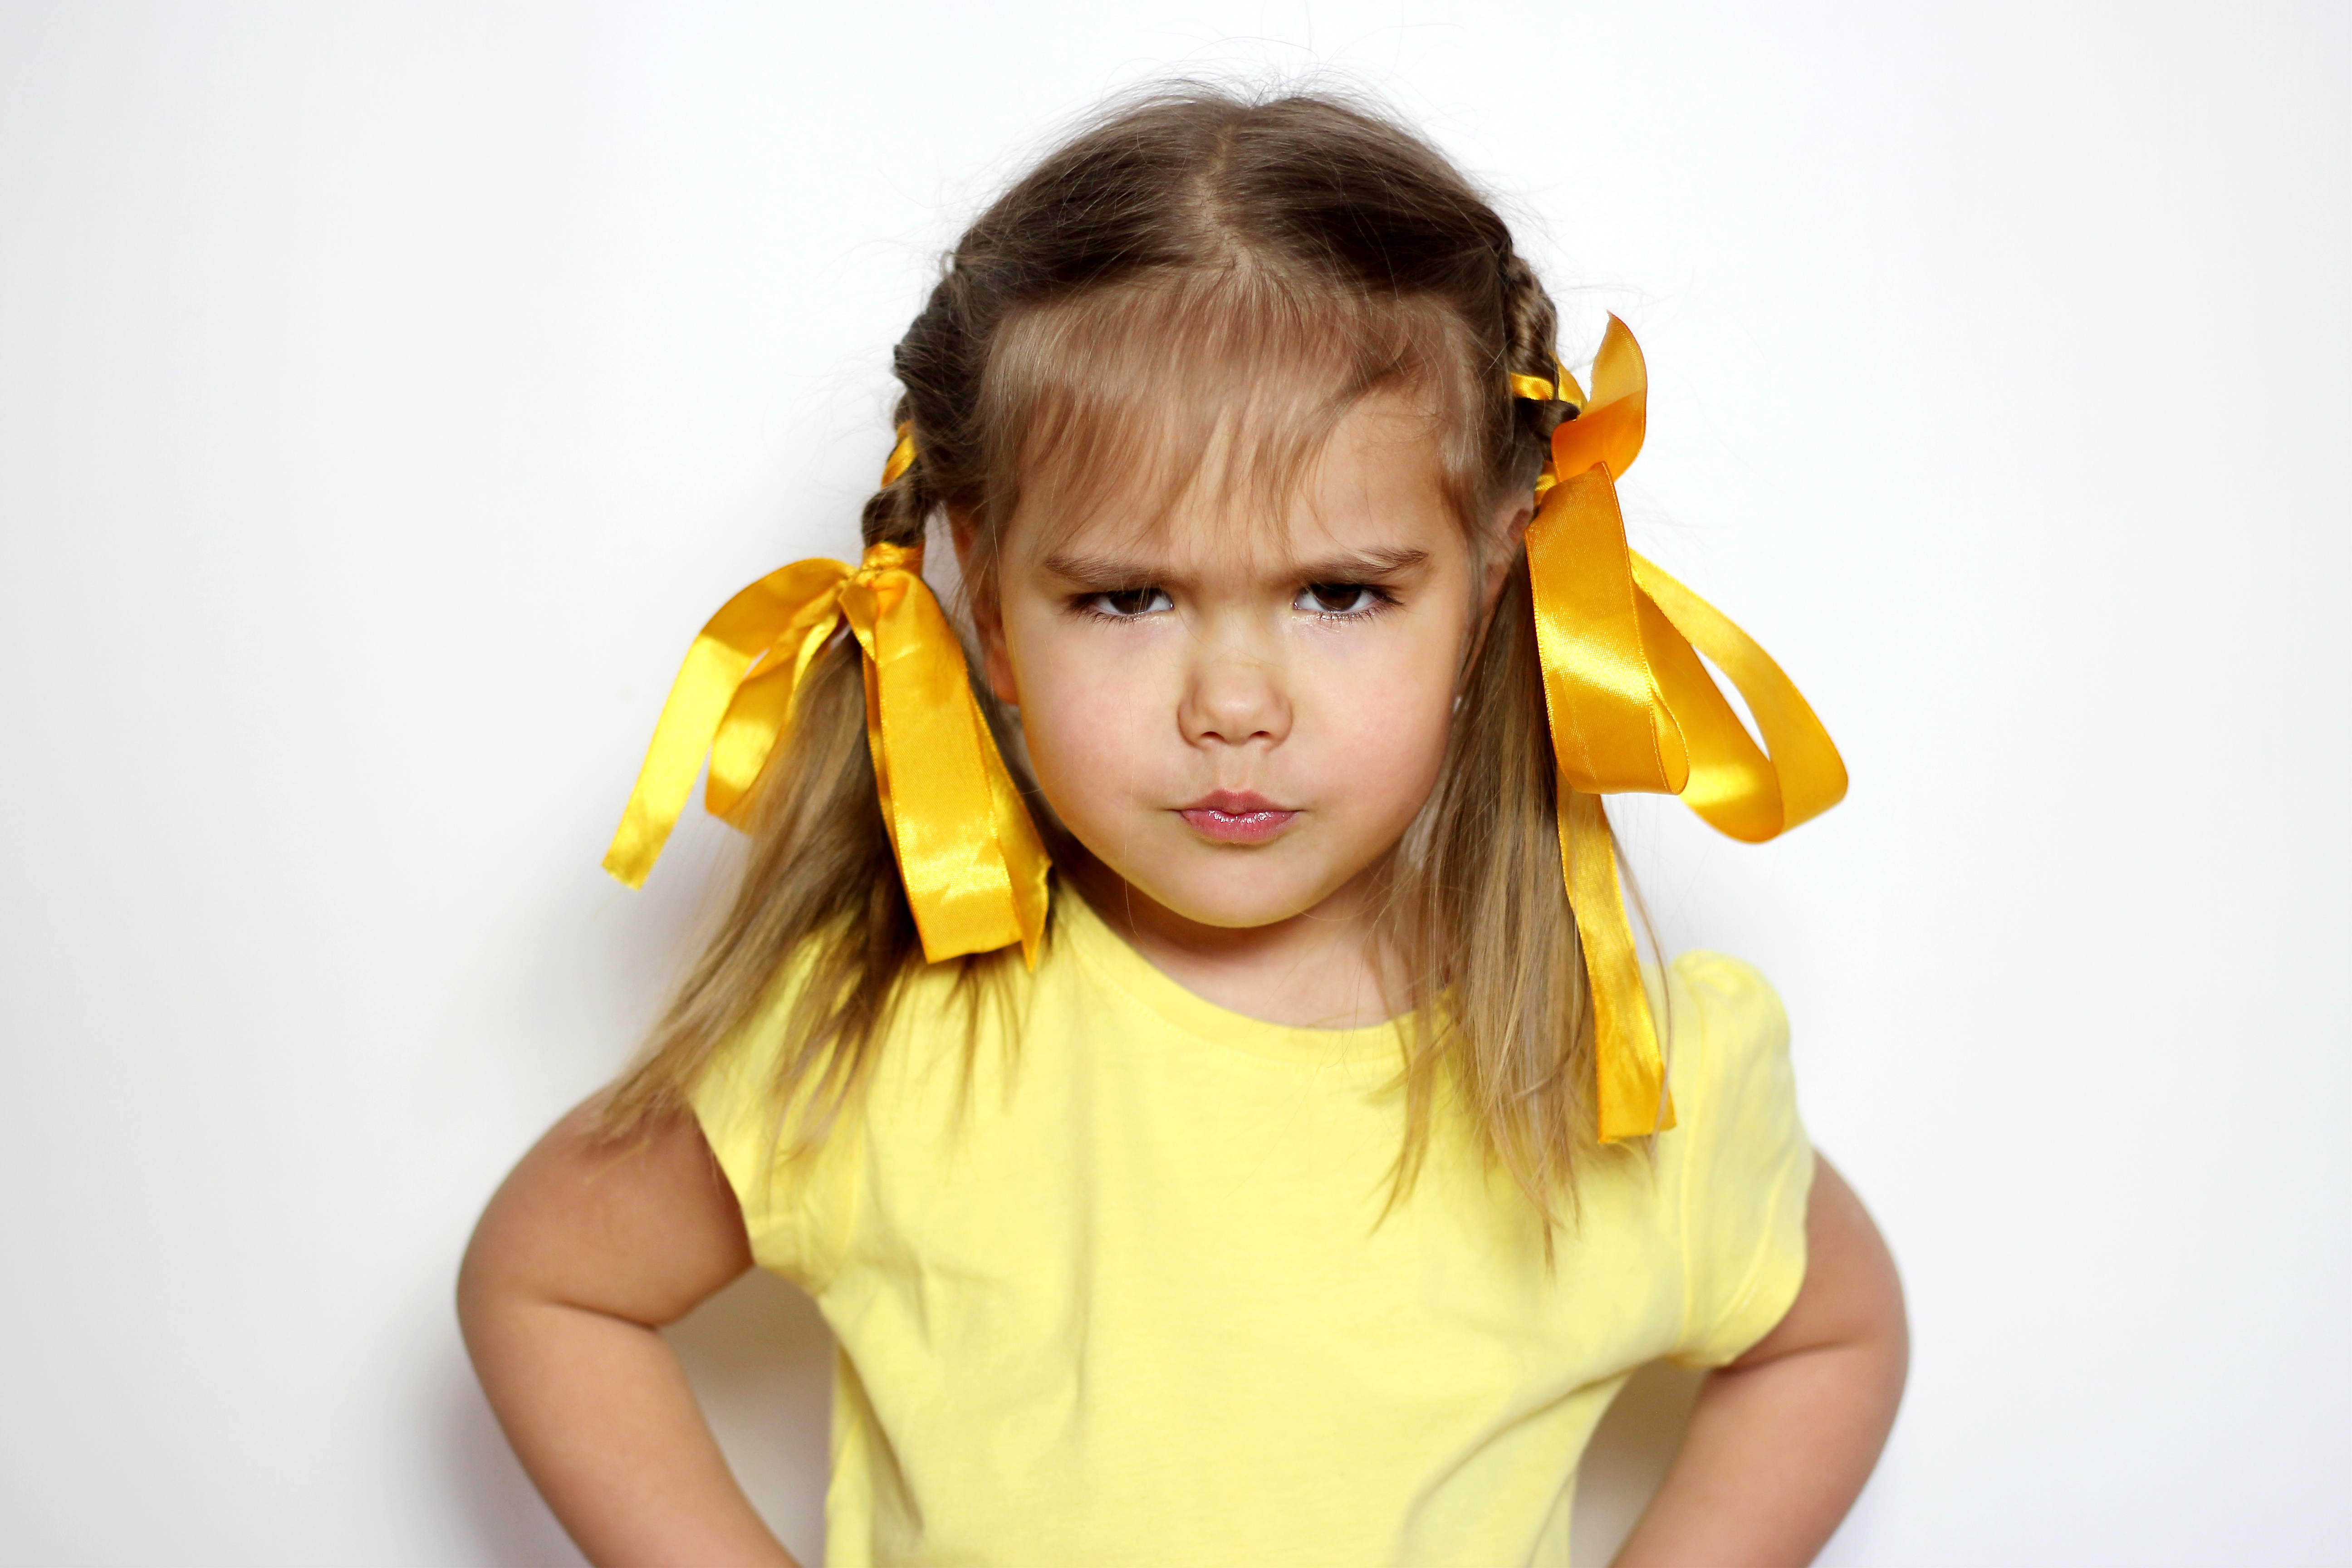 Tips for Preschoolers with a Temper